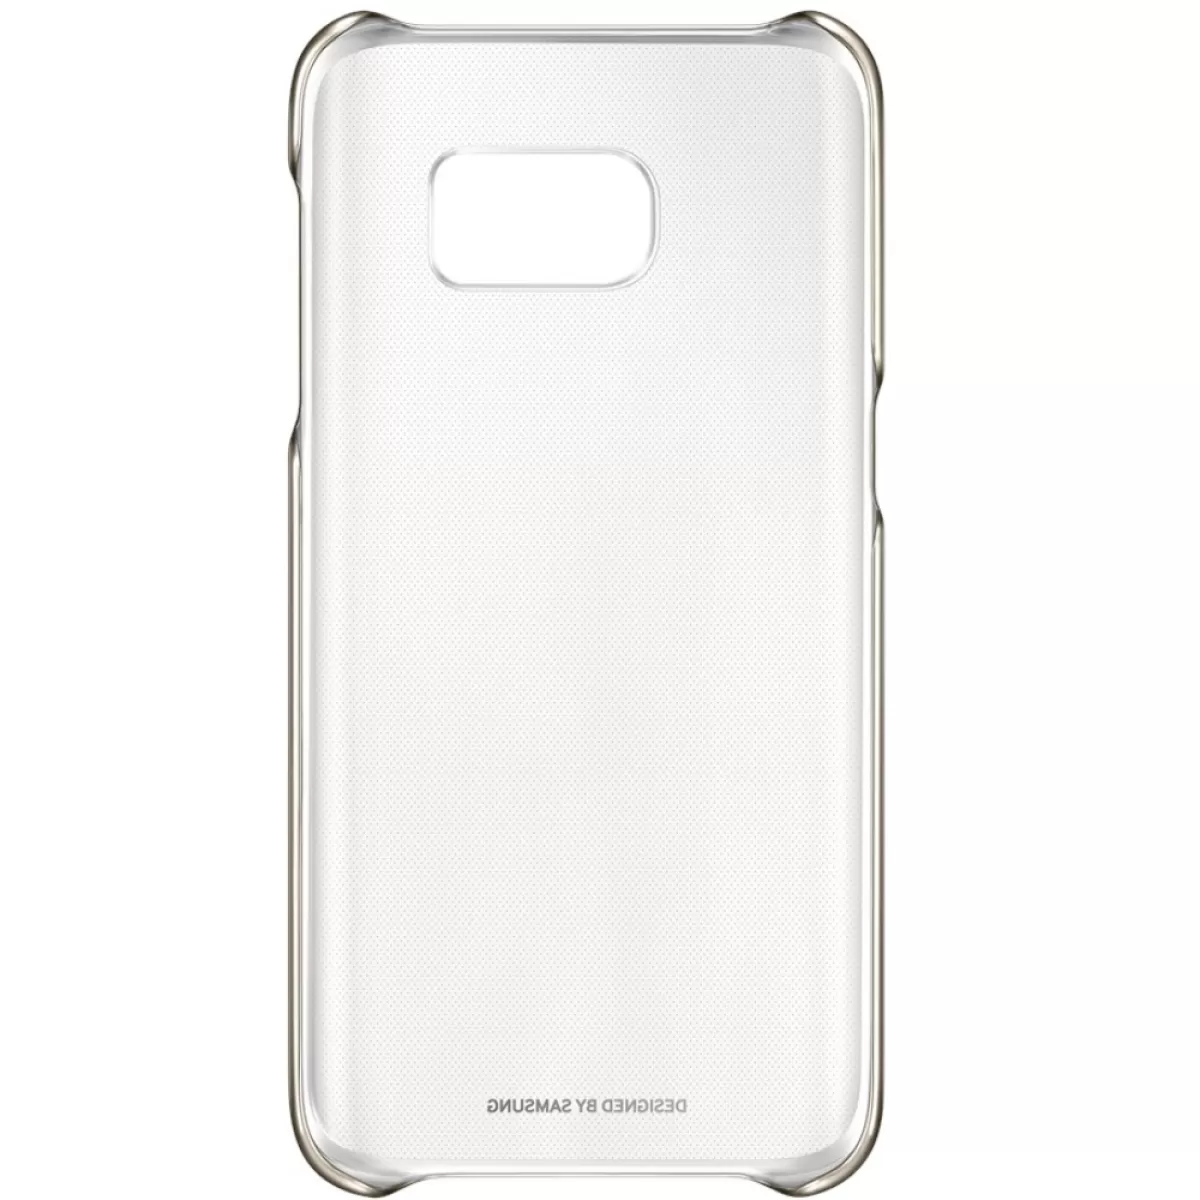 Samsung Galaxy S7, Clear Cover, Gold